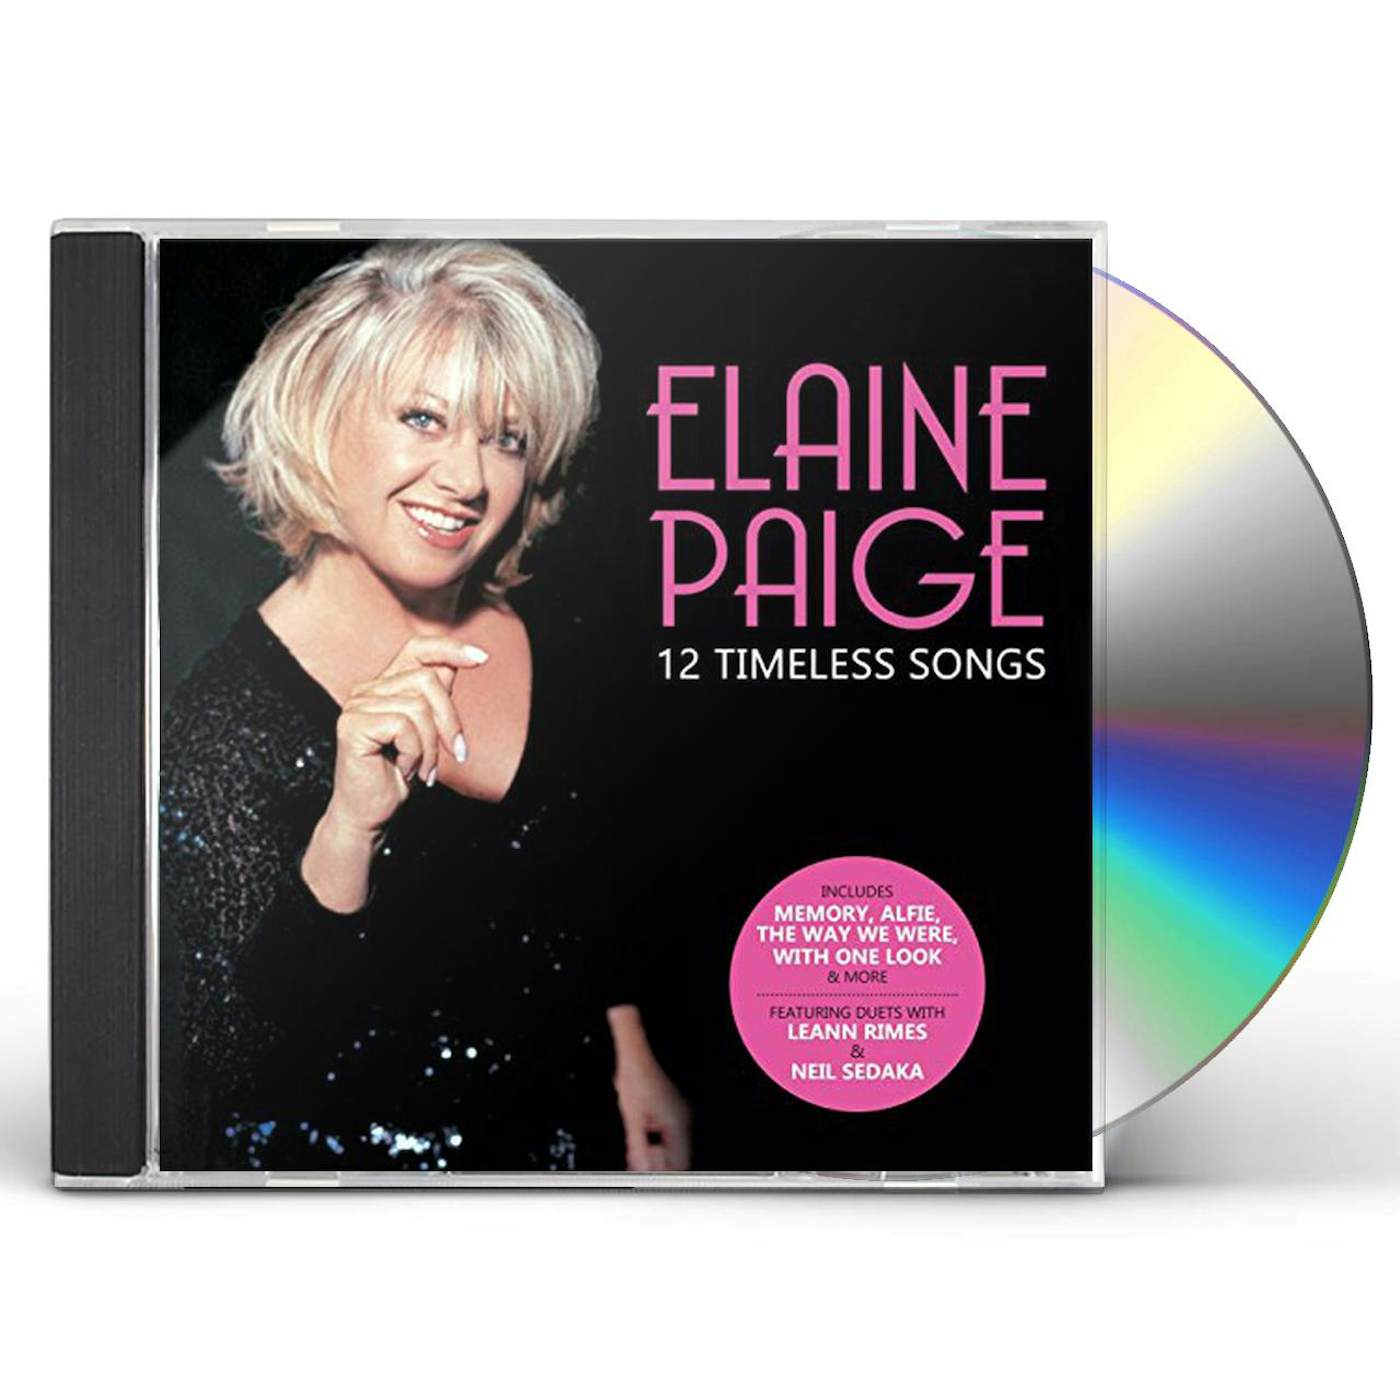 Elaine Paige 12 TIMELESS SONGS CD